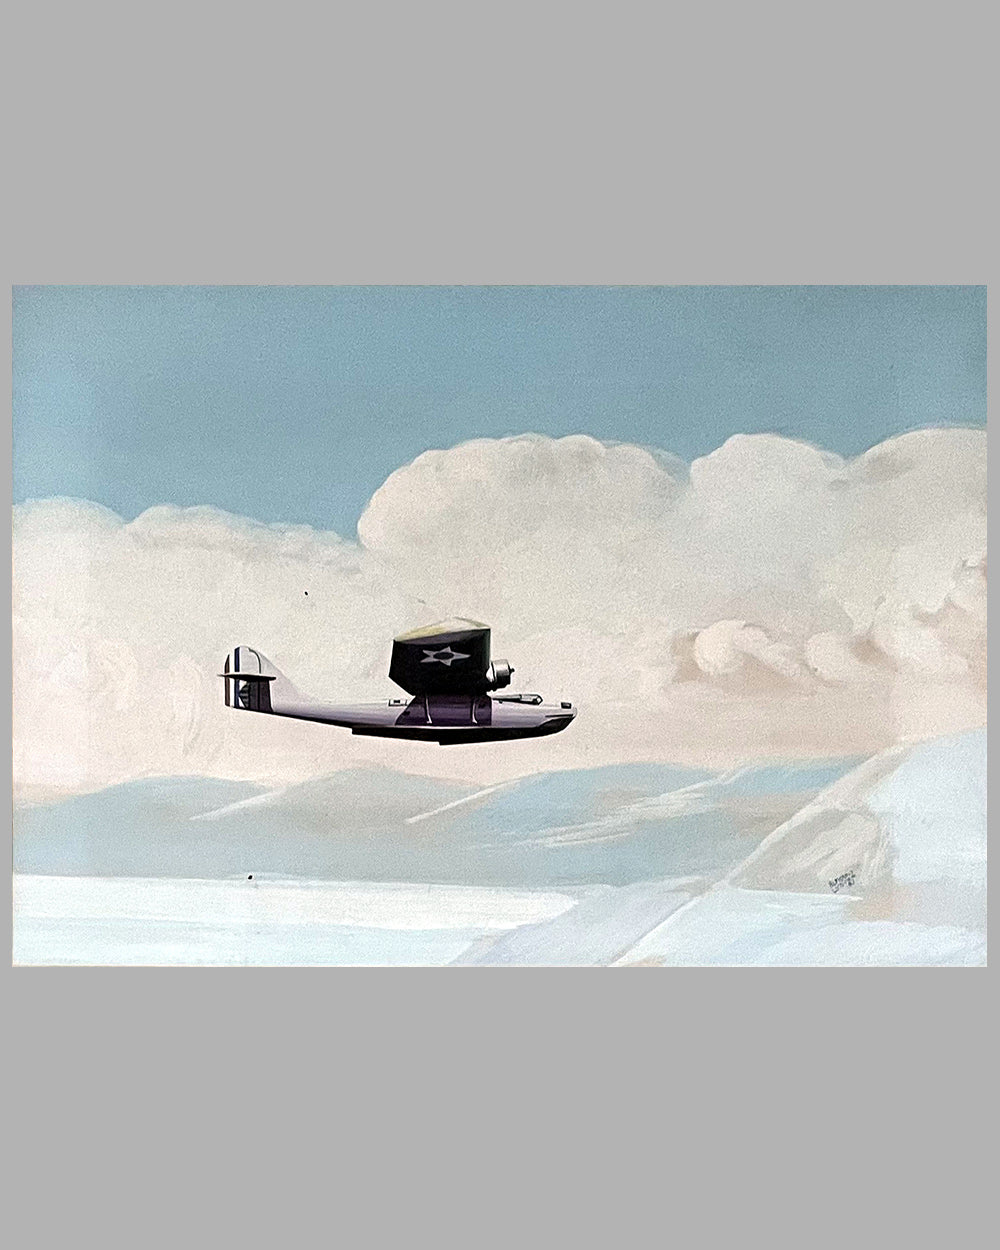 PBY Prototype painting by Alpnarly Lyster, U.S.A. ca 1937. - l'art l'automobile